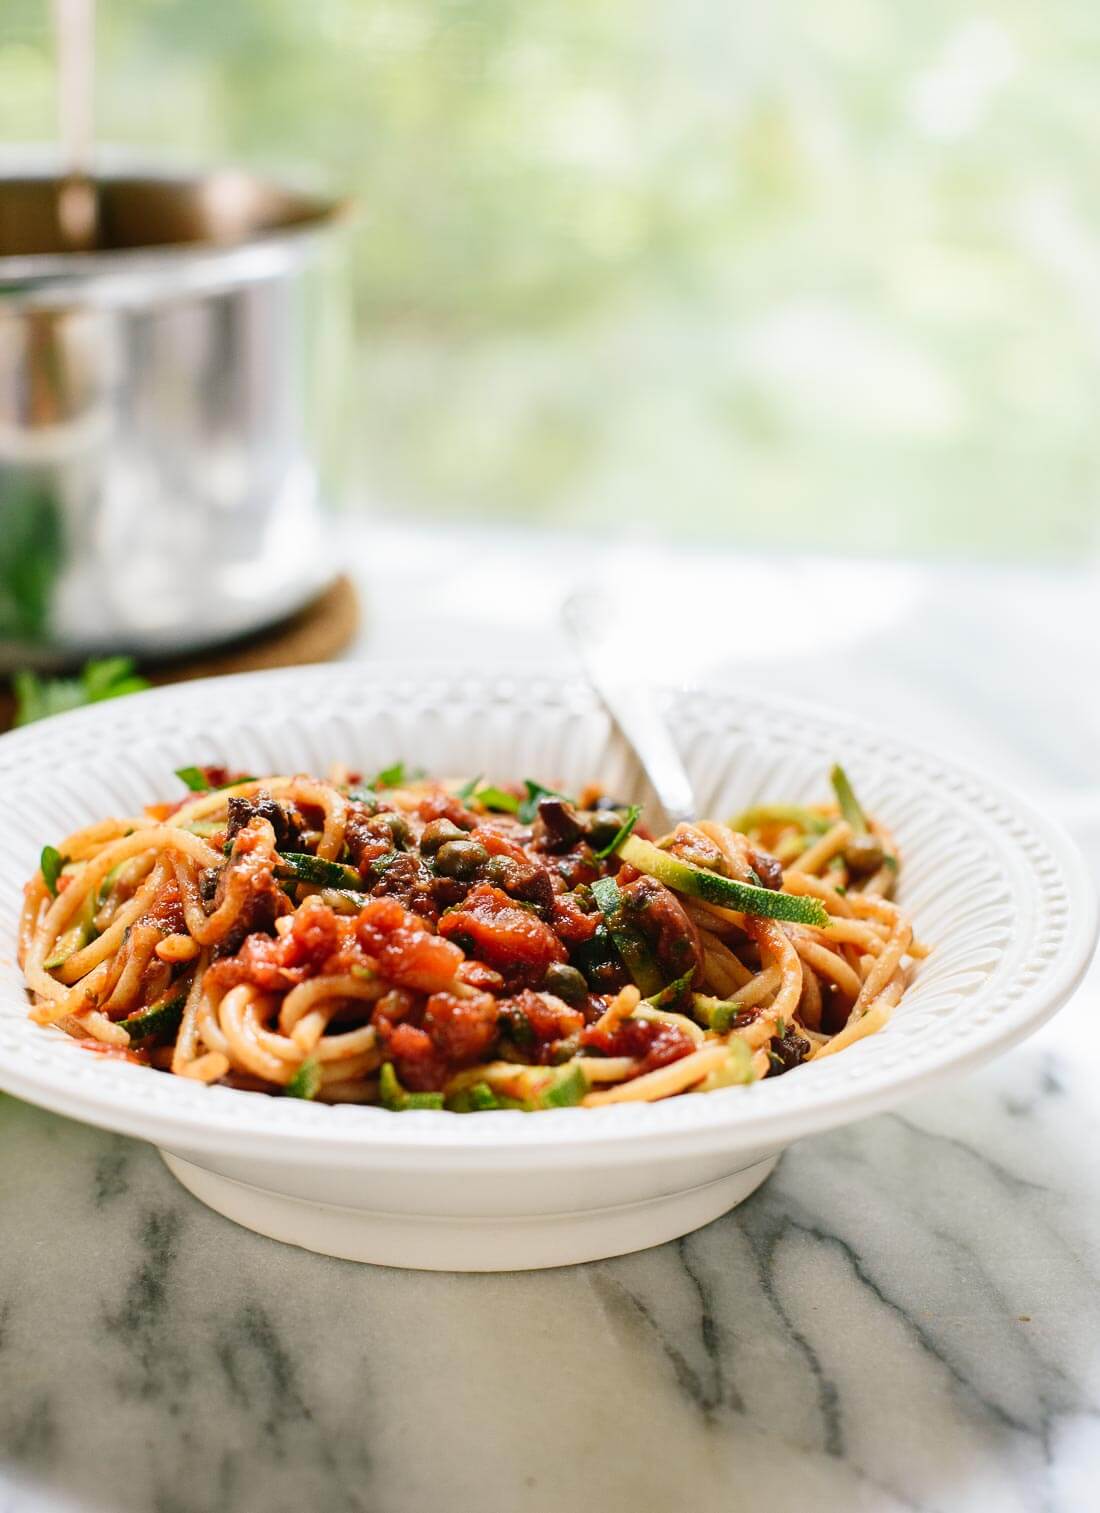 Learn how to make spaghetti alla puttanesca, perfect for easy weeknight dinners! cookieandkate.com